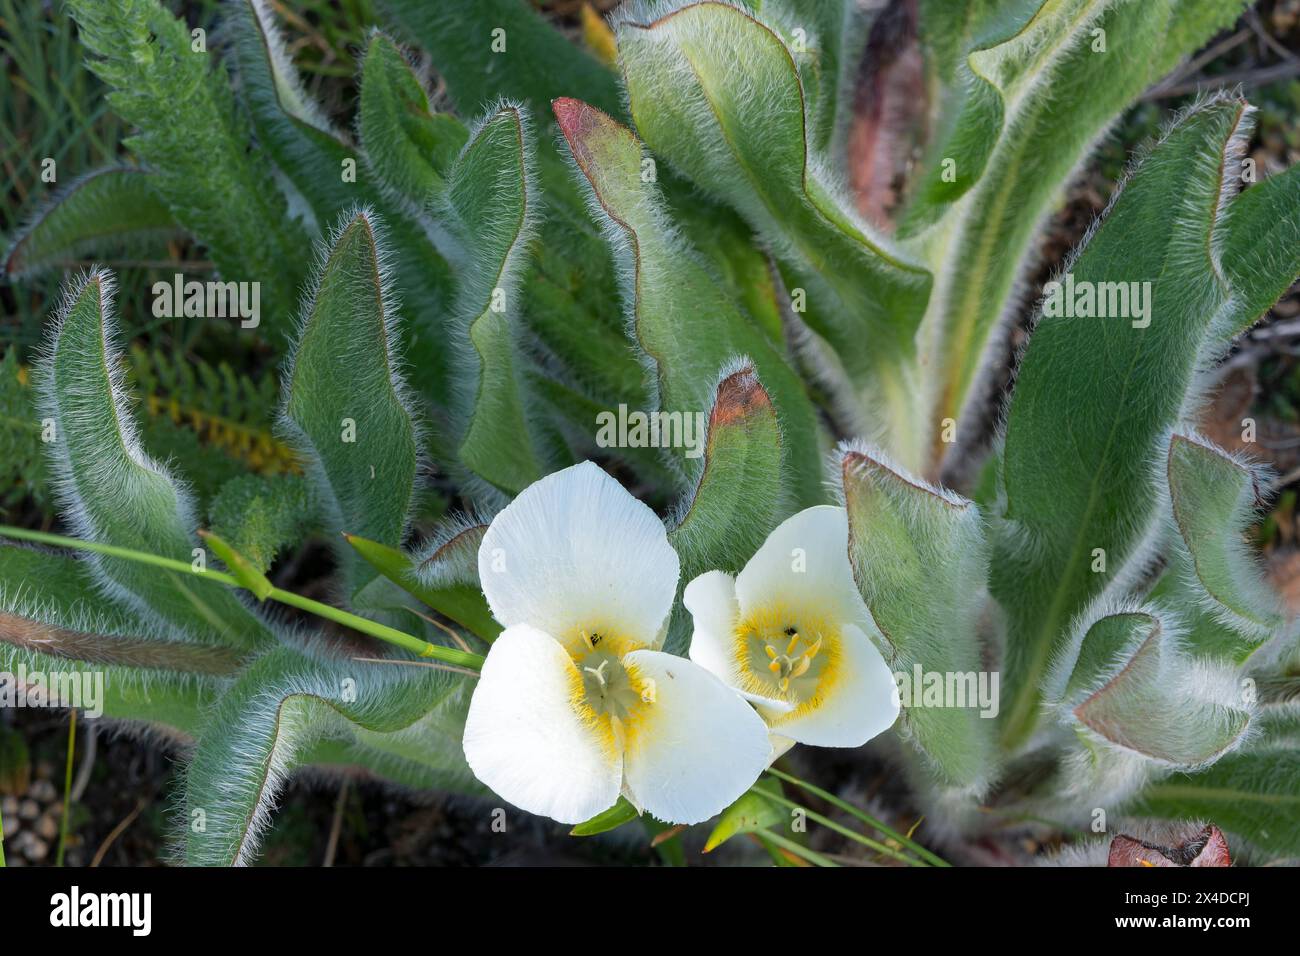 Canada, Alberta, Waterton Lakes National Park. Mariposa lily flowers and leaves. Stock Photo